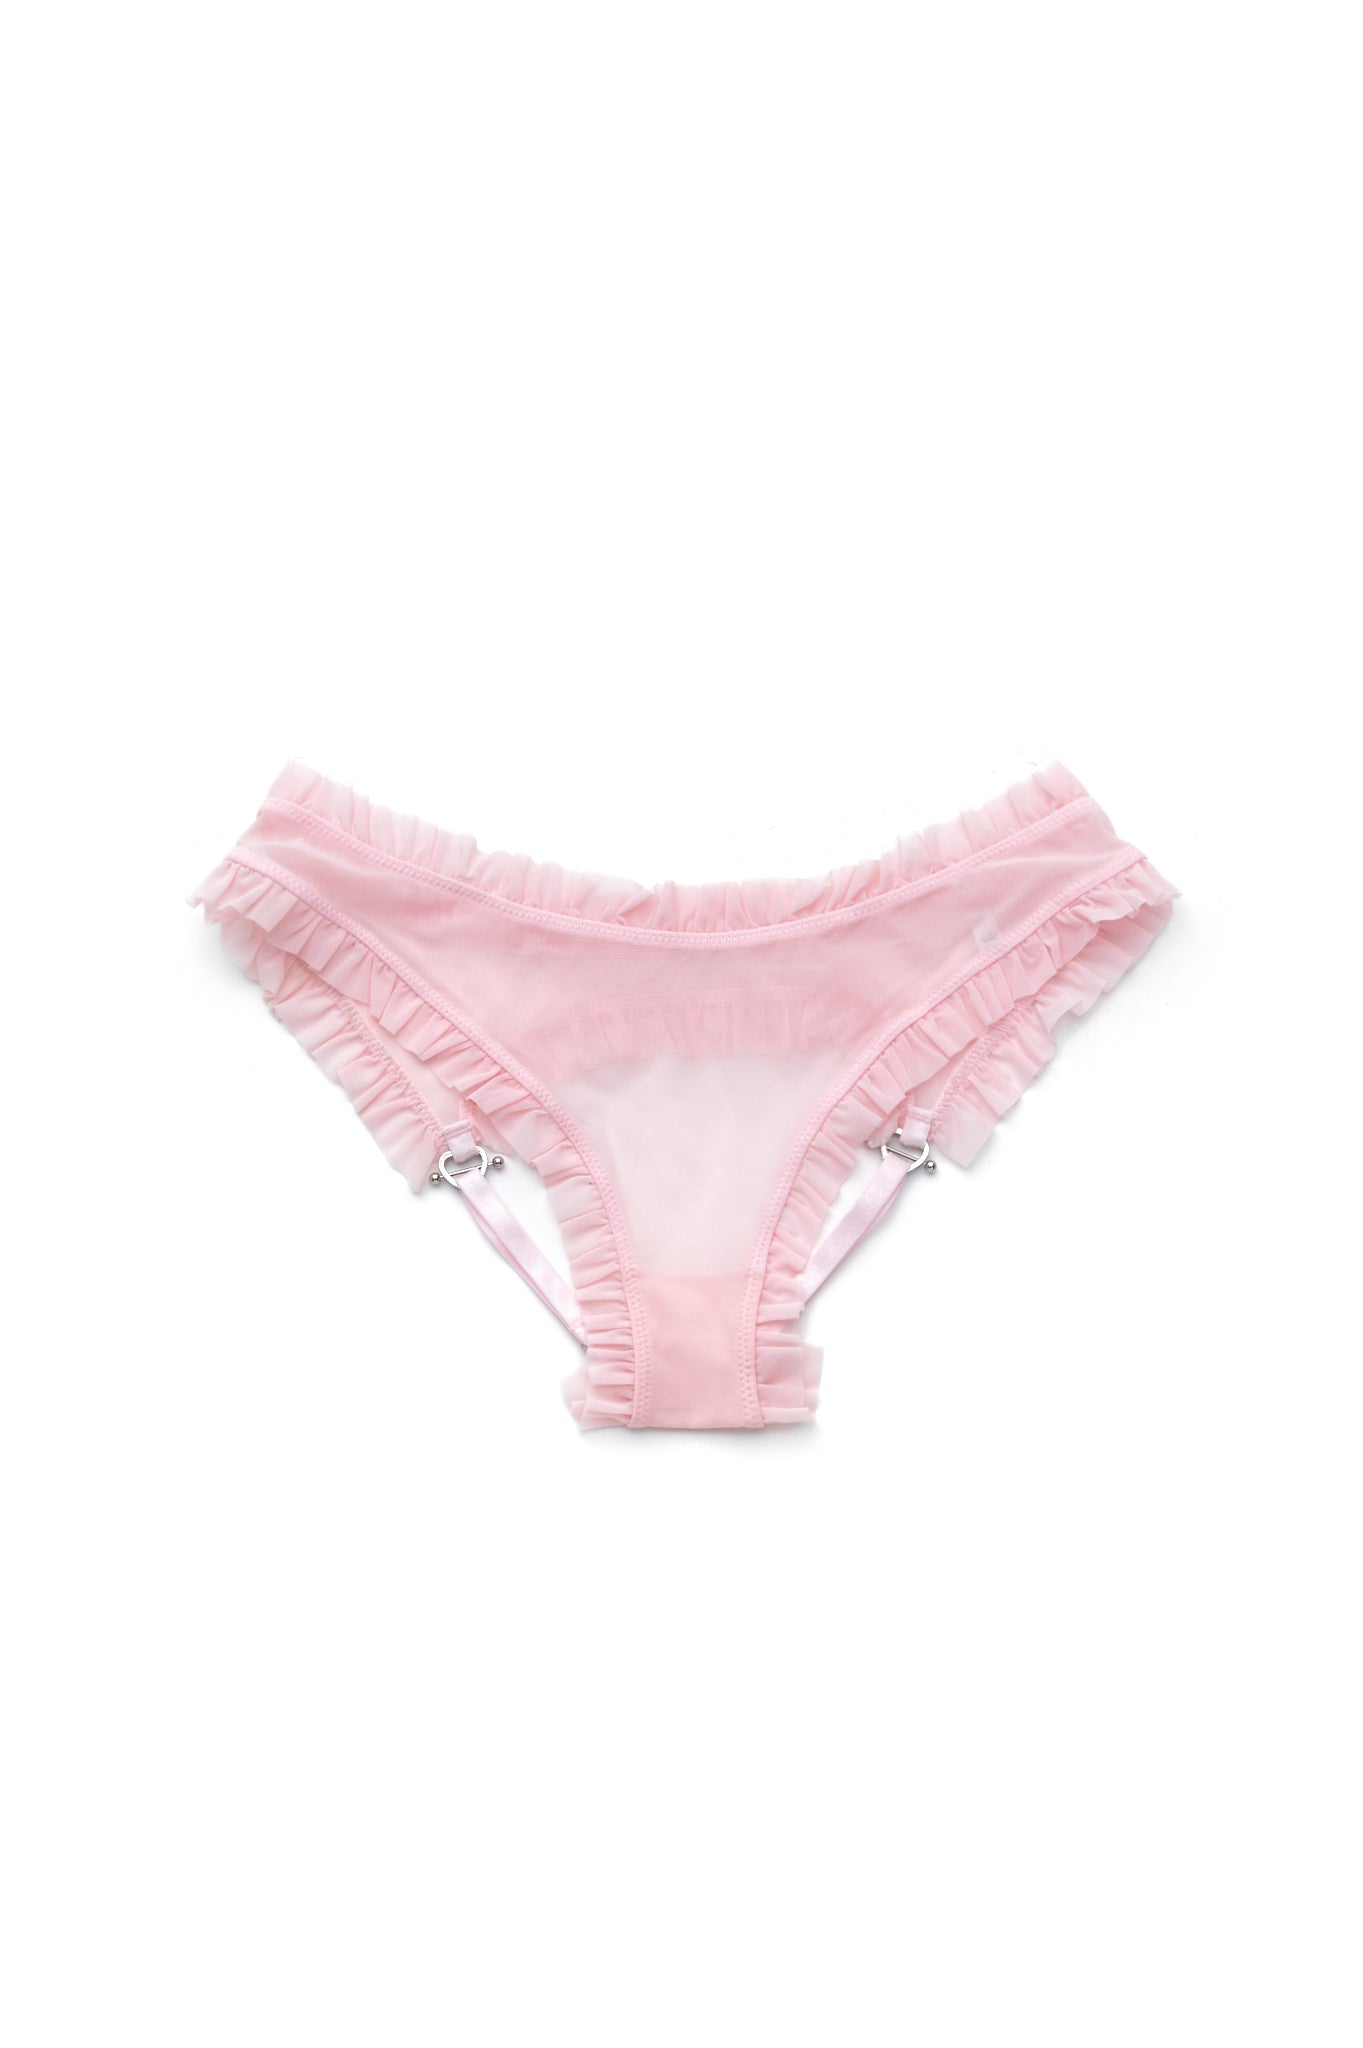 Baby One More Time Backless Briefs In Pink Mesh – The End Label